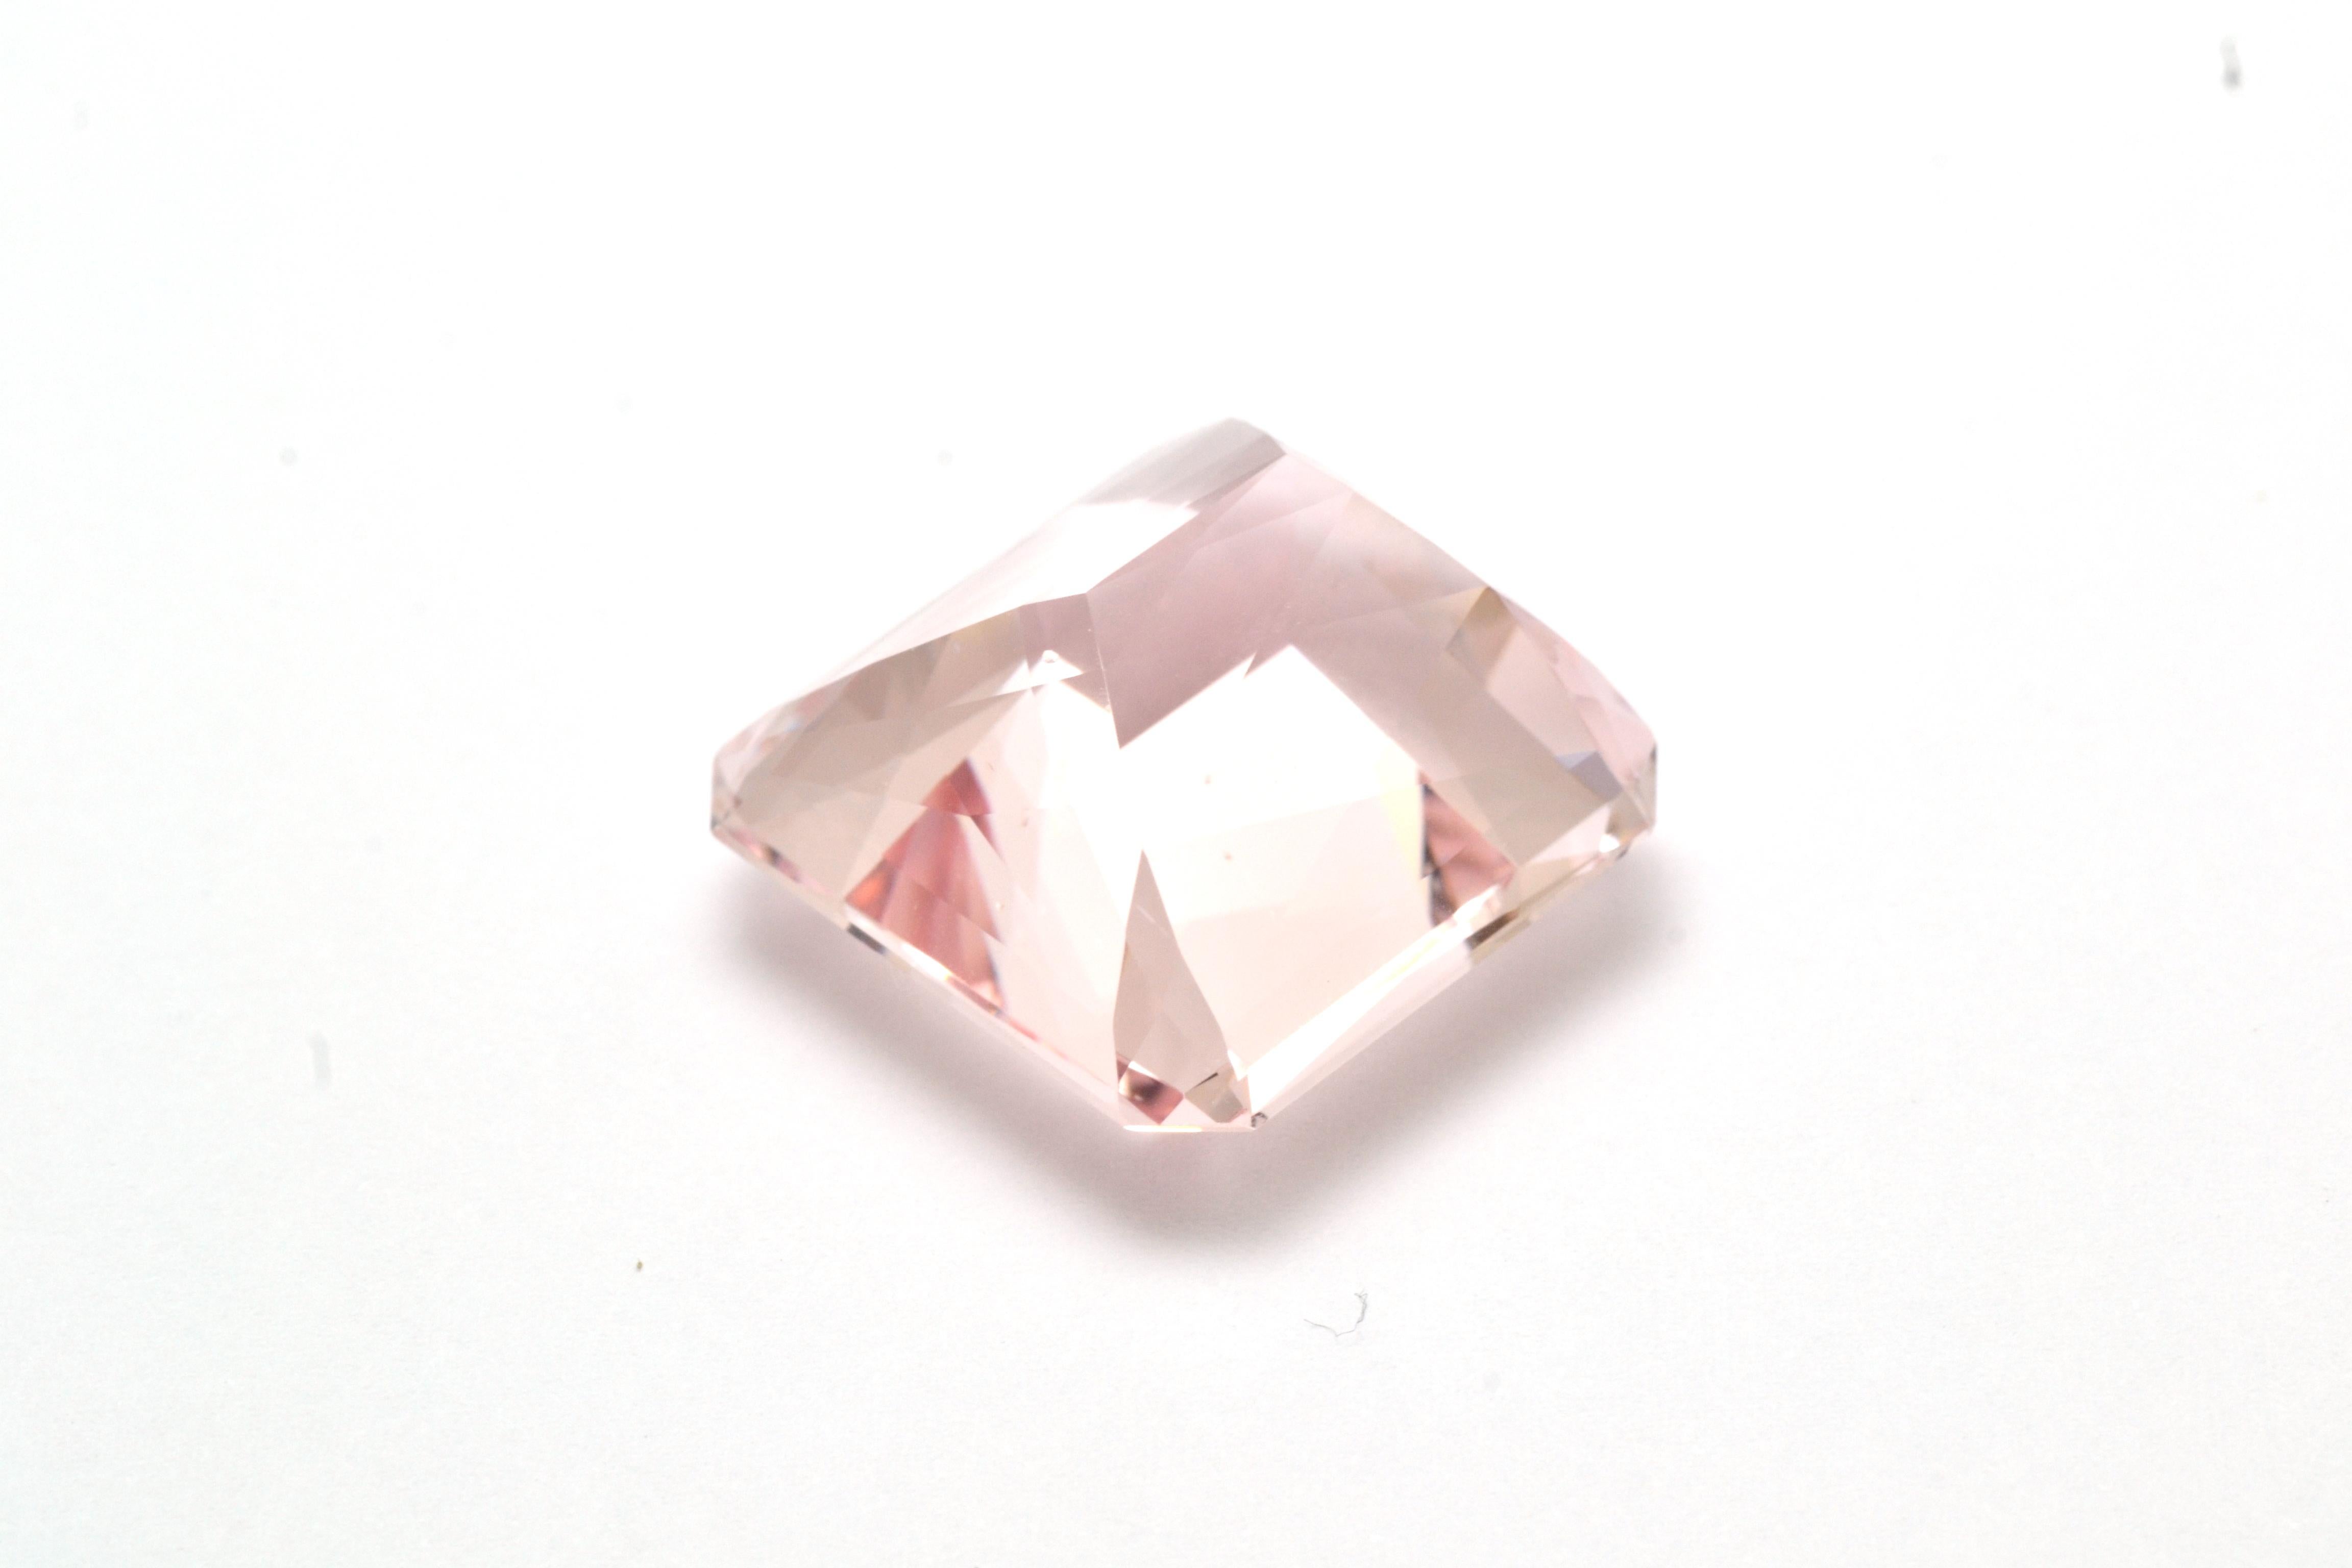 Are you a collector or stones? Don't miss this beauty pink stone!
Are you a jewelry lover? If you wish you can collaborate with us to turn this beautiful gemstone into an extraordinary, 
one-of-a-kind work of art.
An important natural  Brazilian